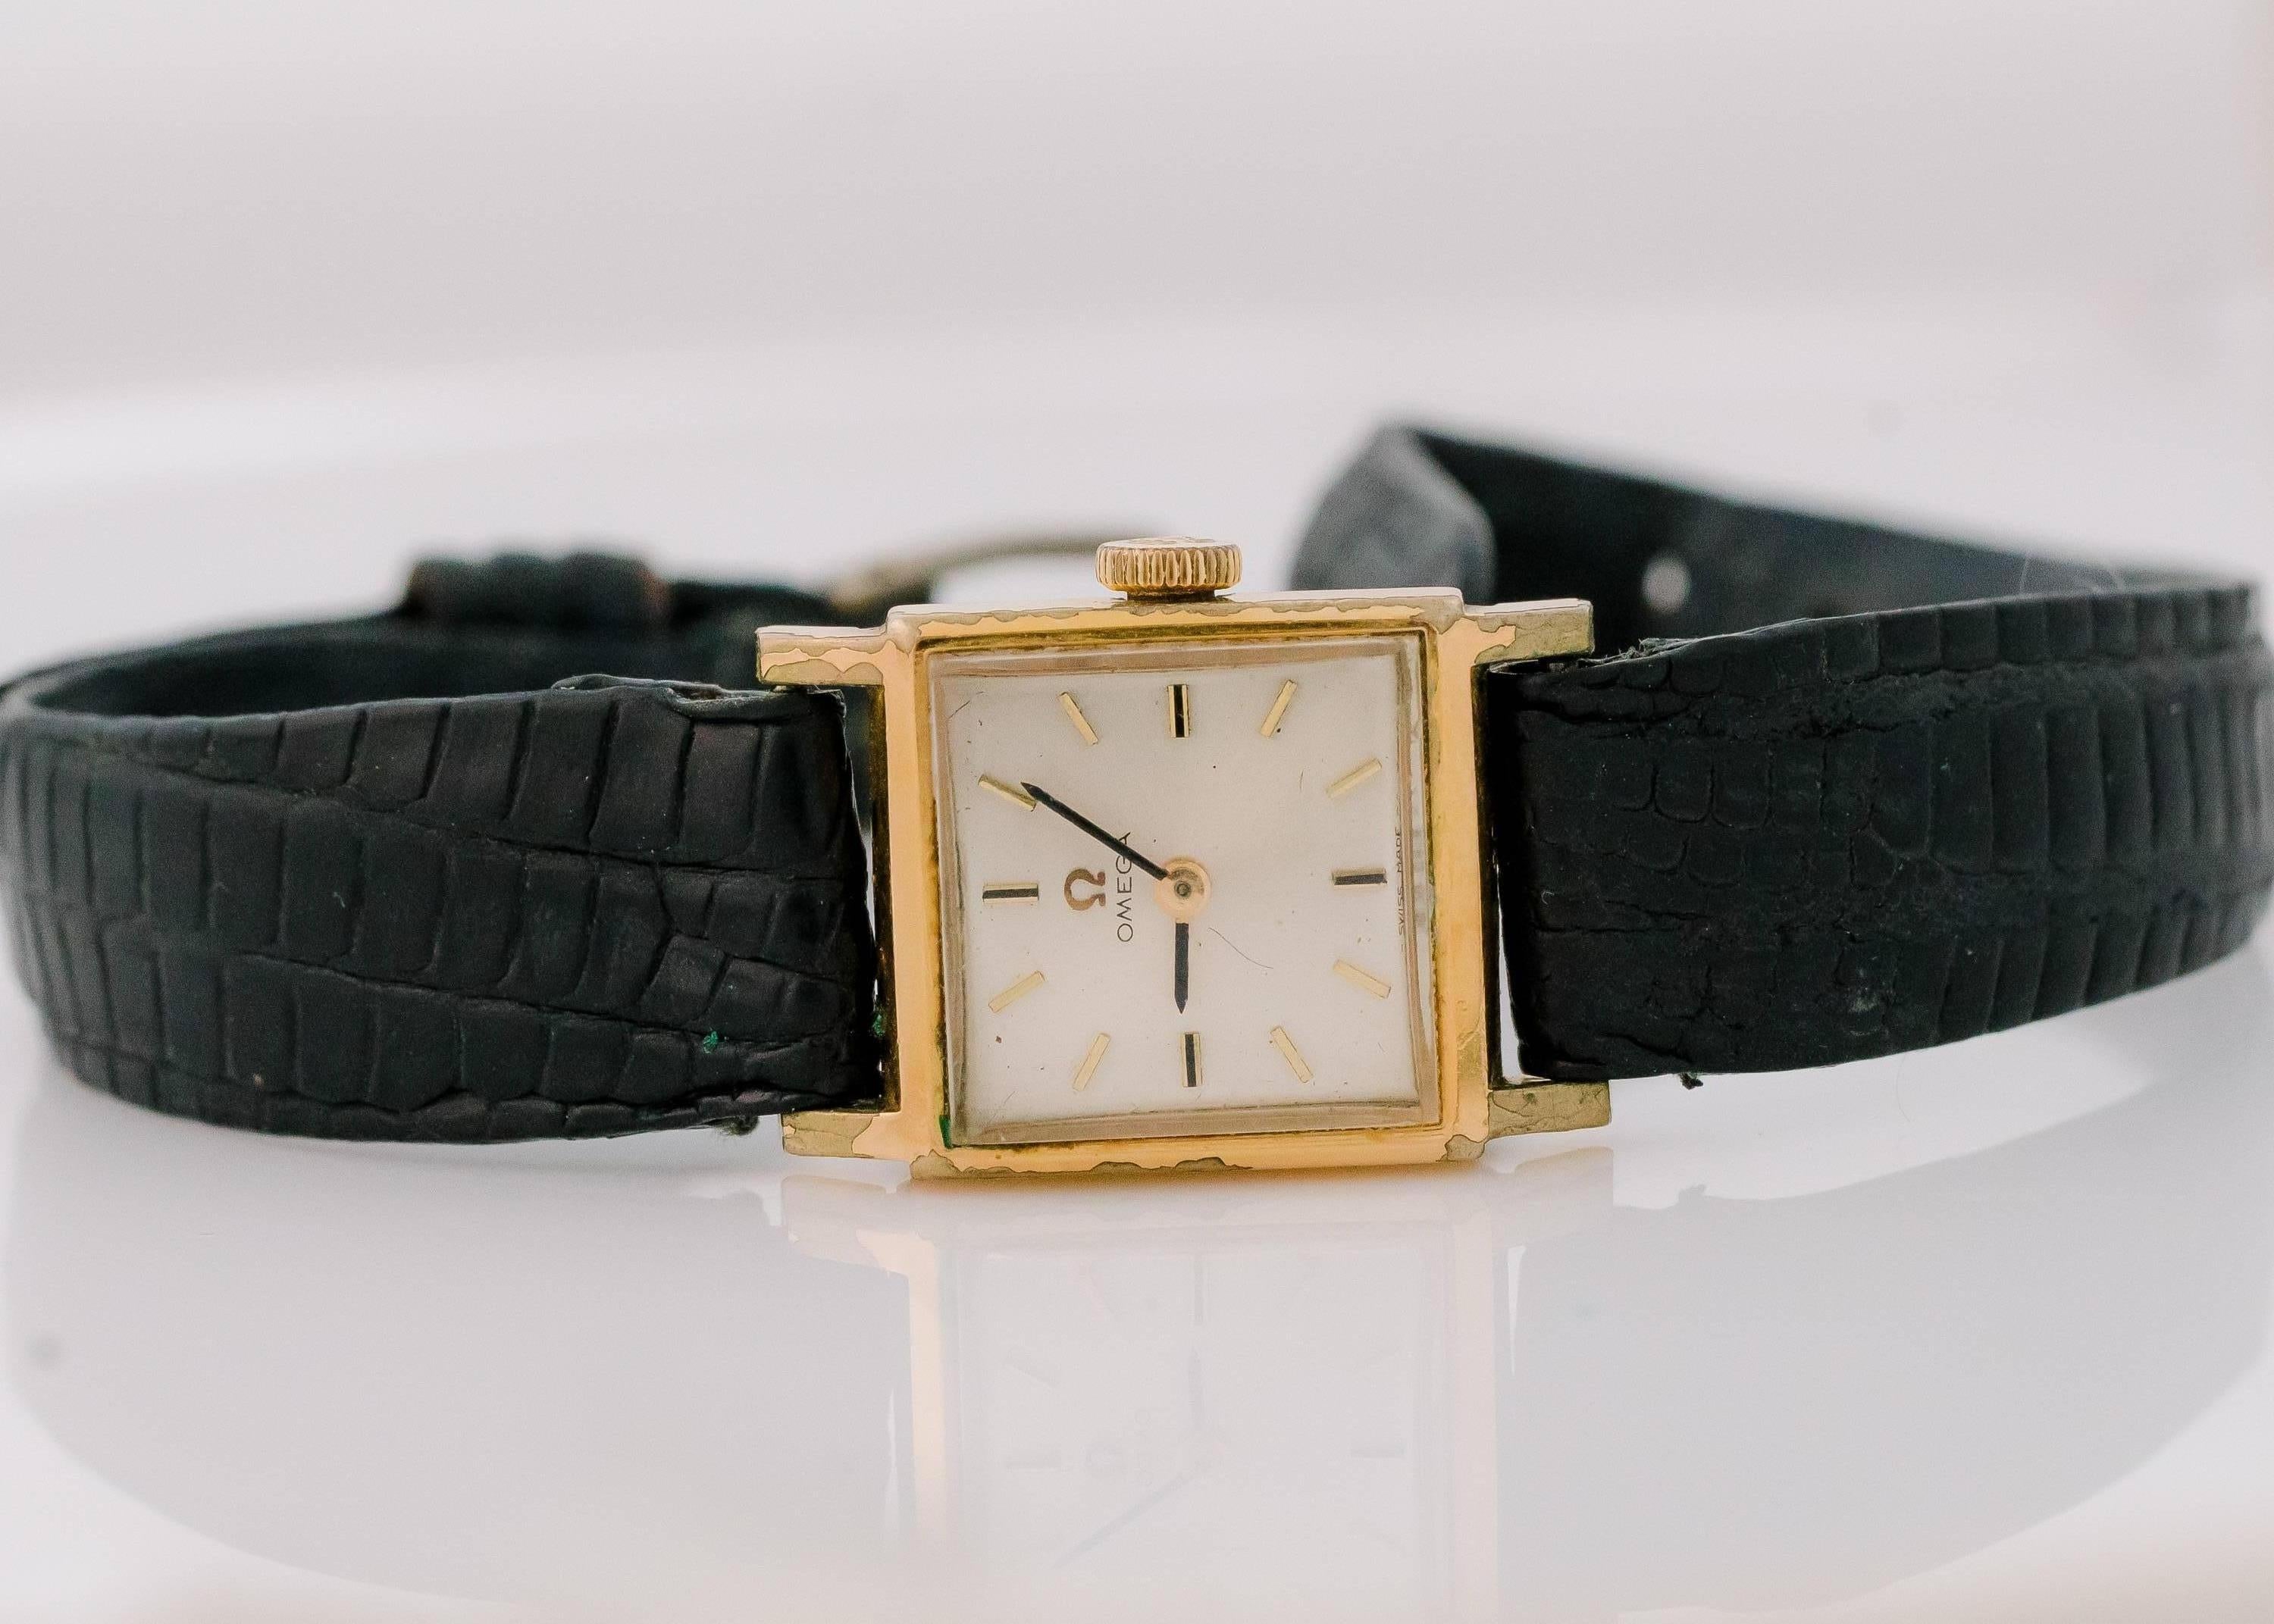 This 1950s Omega 14 Karat Yellow Gold Ladies Watch features a Square Tank style Case. This Swiss made watch has a stainless steel back, acrylic crystal, stick dial and leather strap. In true Retro style, it also has manual wind up movement. Wear